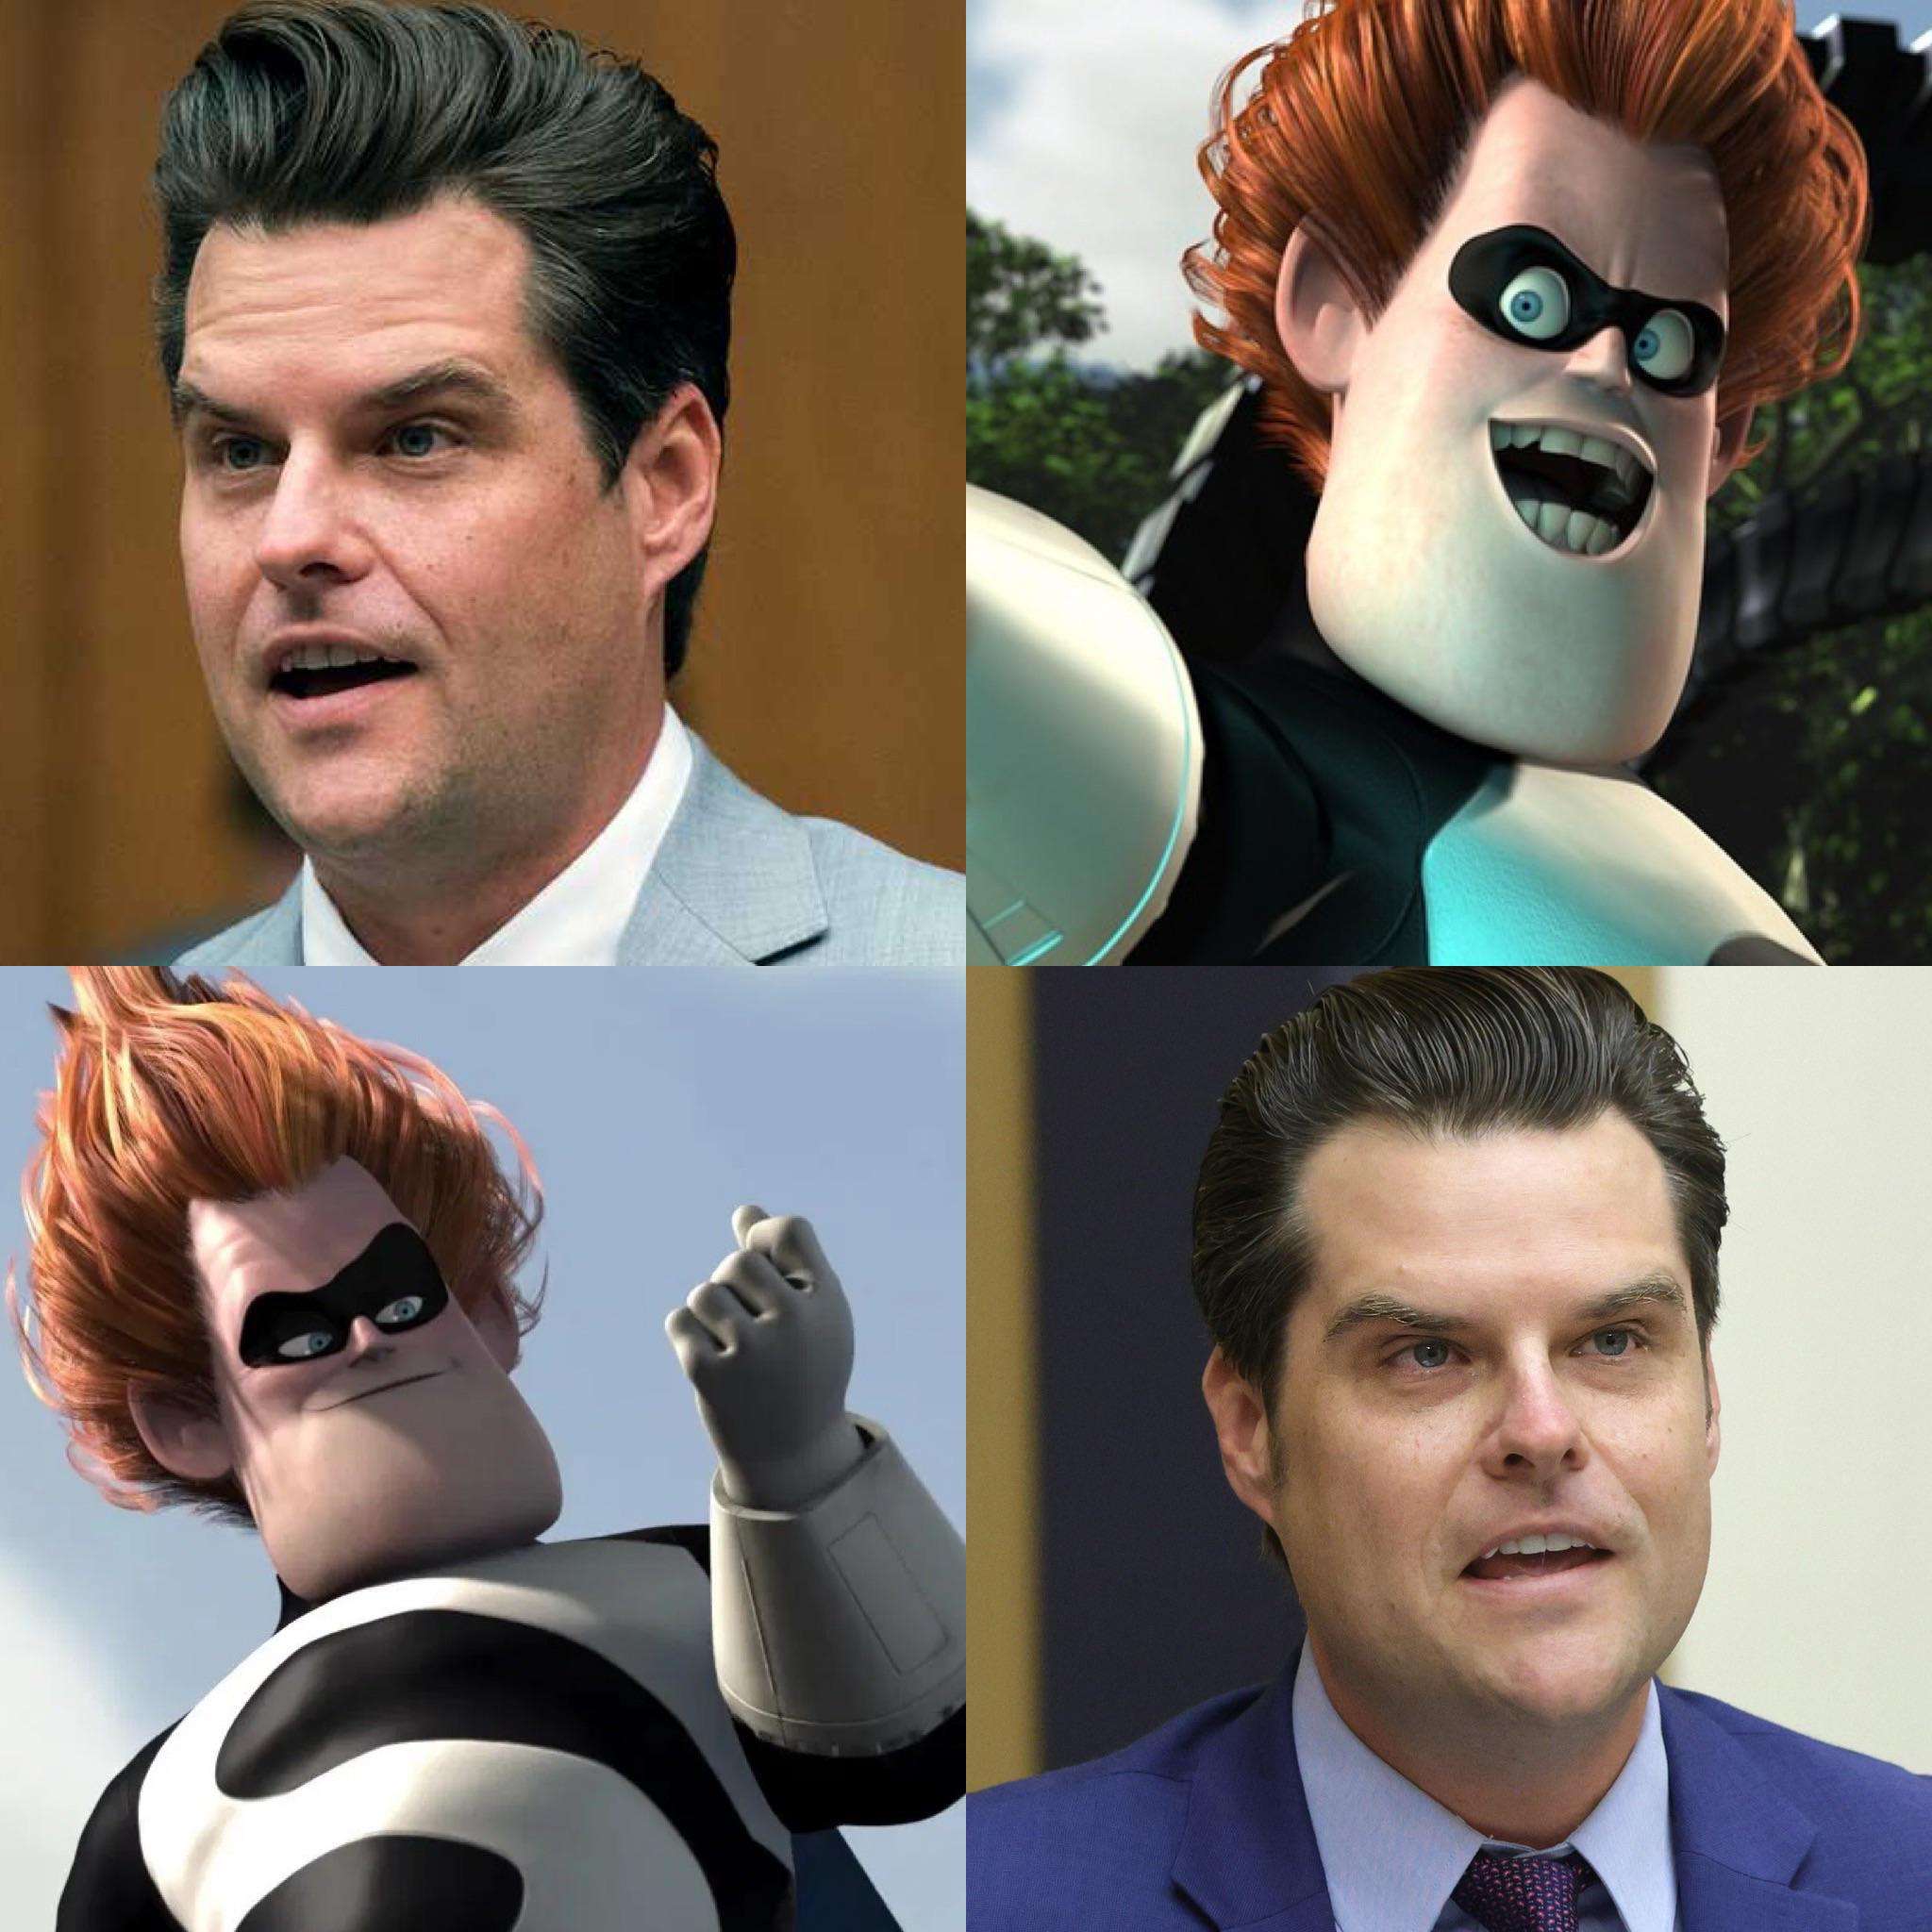 image showing I finally figured out who Matt Gaetz has always reminded me of… Syndrome from the Incredibles!